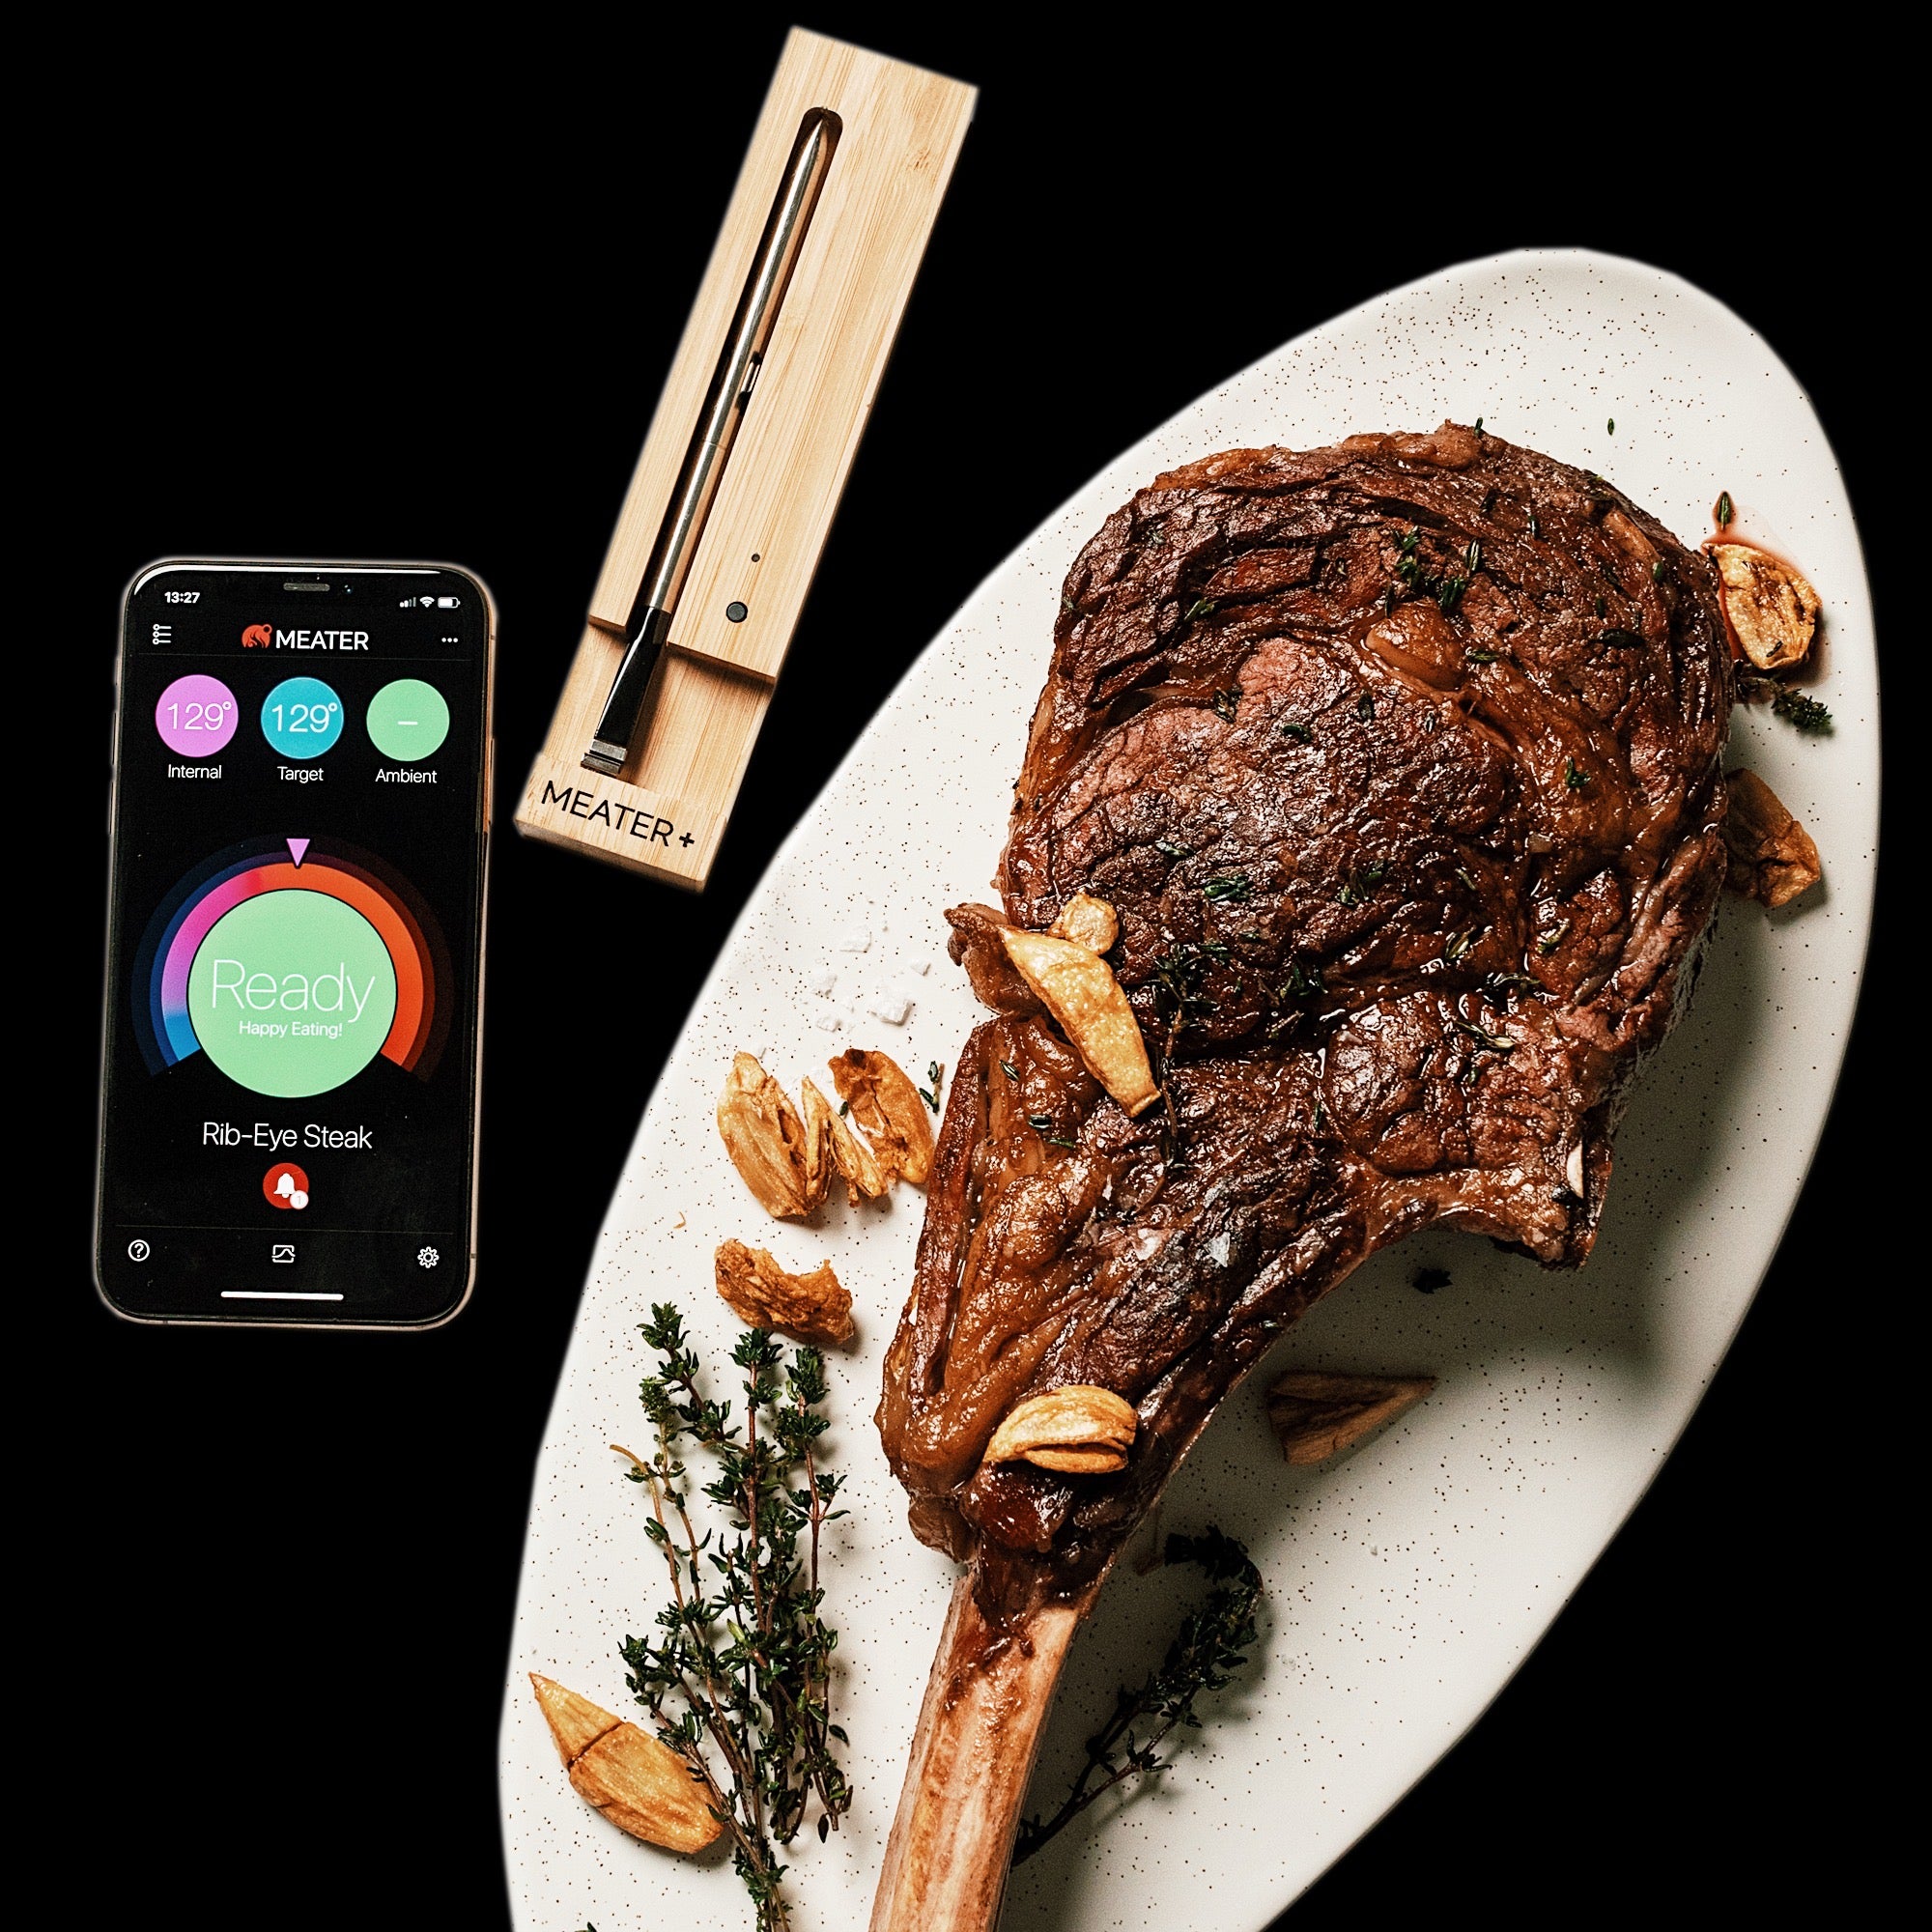 Meater Plus meat thermometer review: Hands-off precision cooking - Reviewed